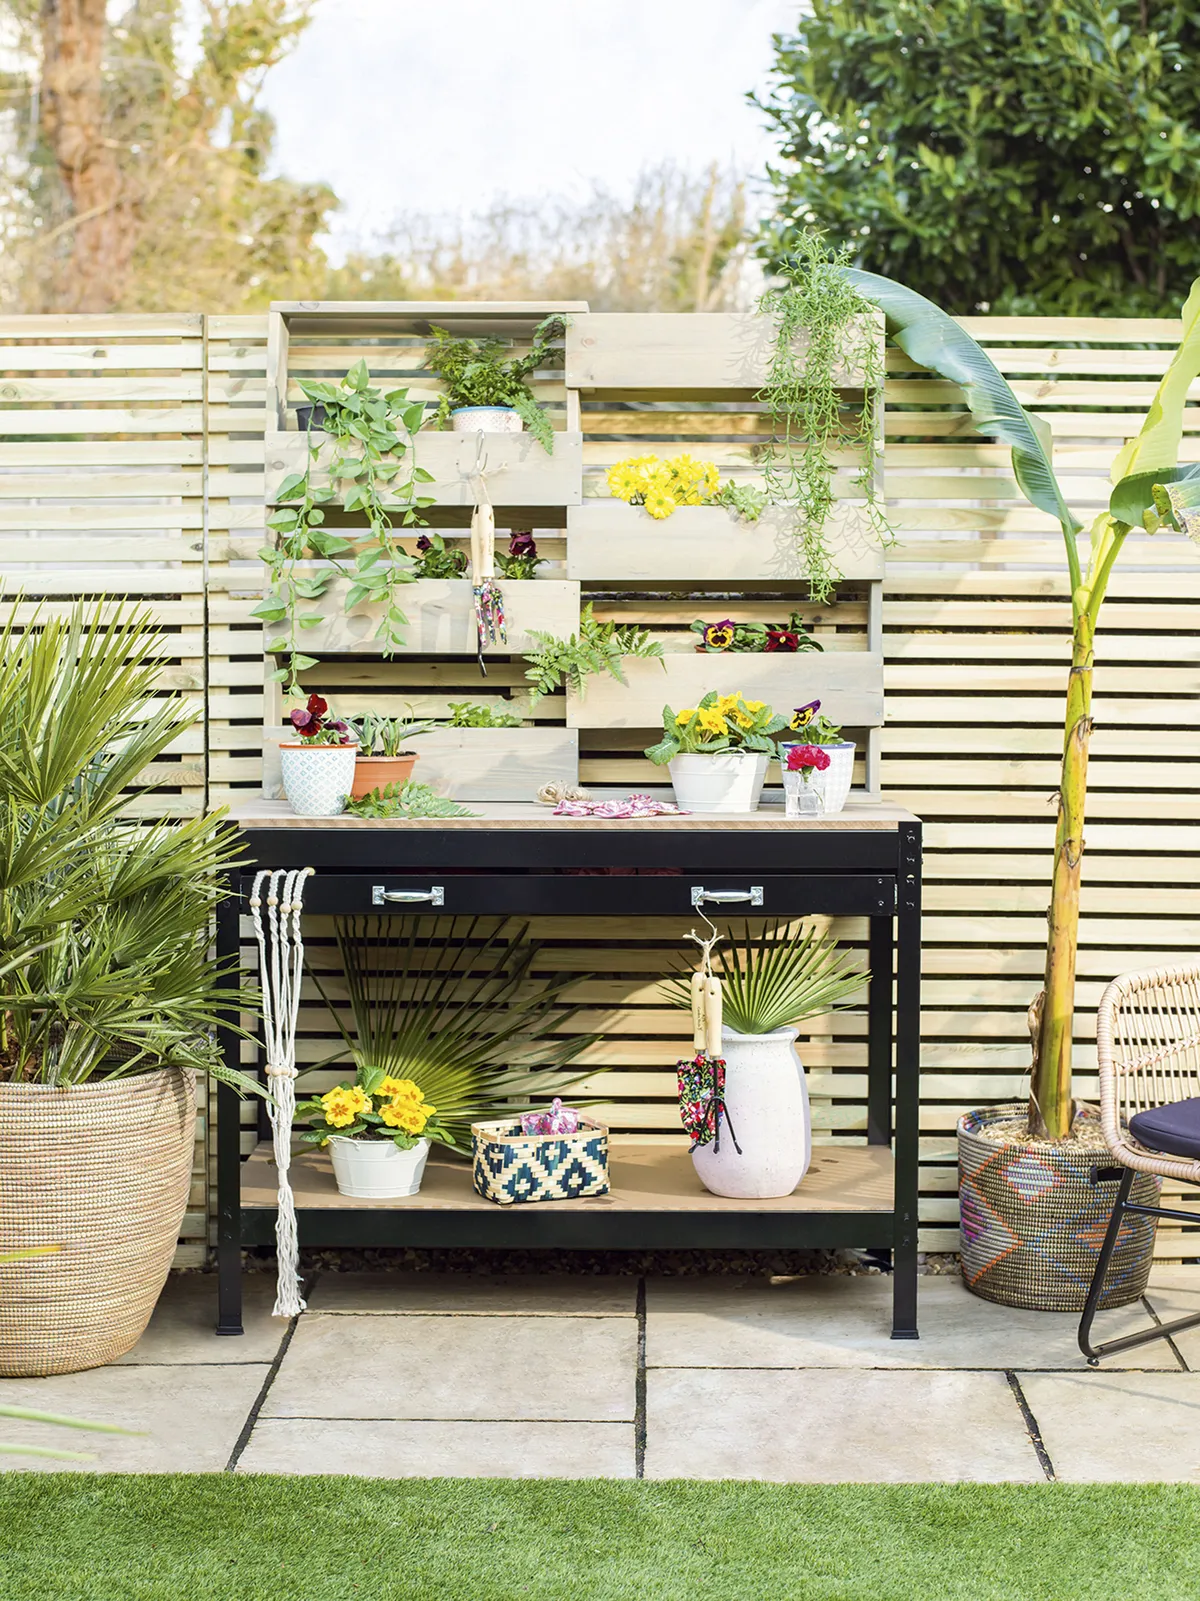 It’s not just inside the garden room that AJ has transformed. Outside, she’s set up a potting station, where she’s growing herbs, houseplants and flowers